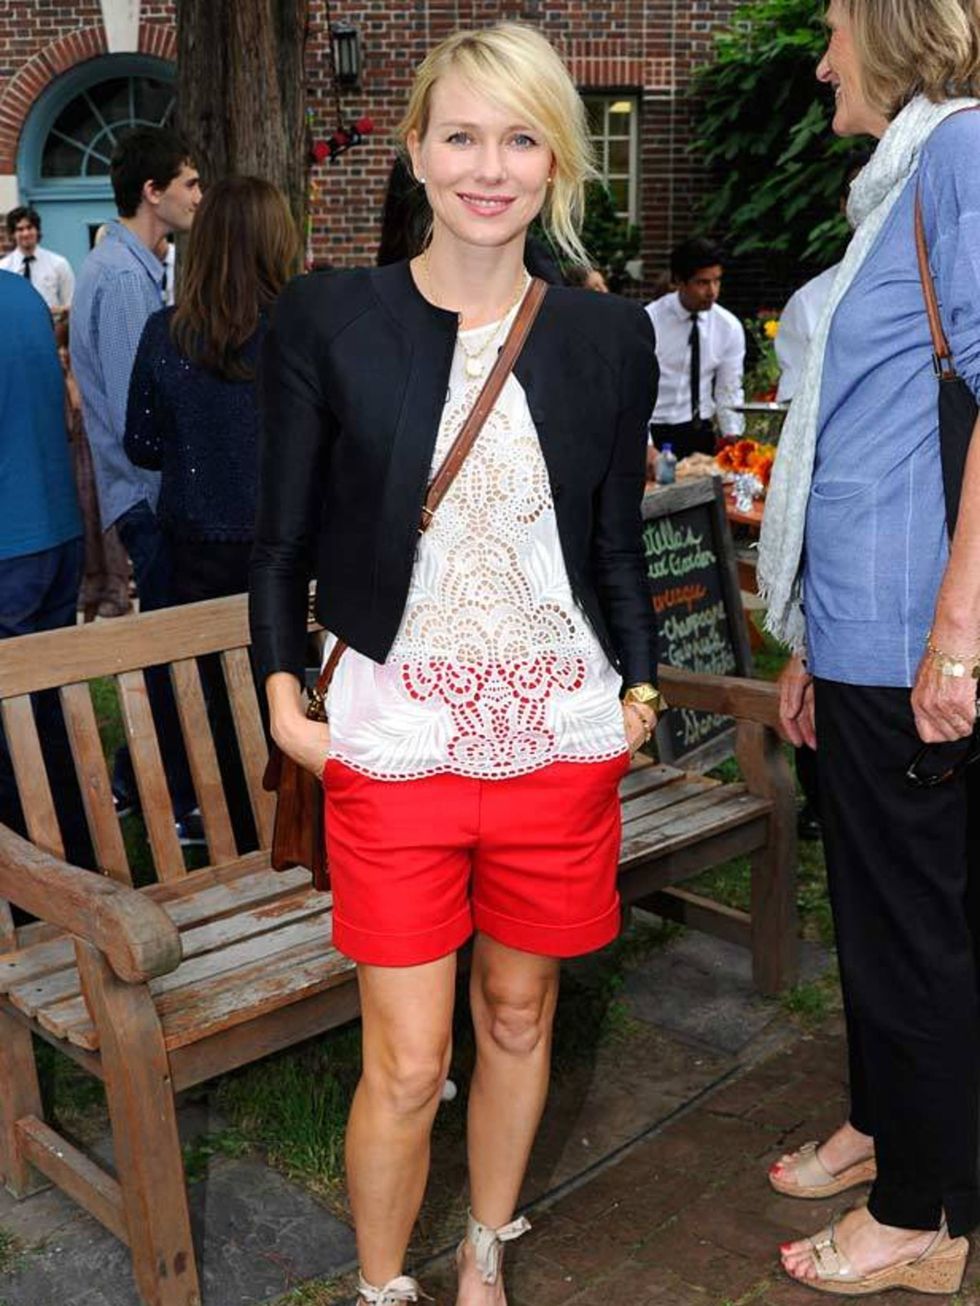 <p><a href="http://www.elleuk.com/content/search?SearchText=Naomi+Watts&amp;SearchButton=Search">Naomi Watts</a> pairing a pair of bright red shorts with a lace top at the <a href="http://www.elleuk.com/catwalk/collections/stella-mccartney">Stella McCartn